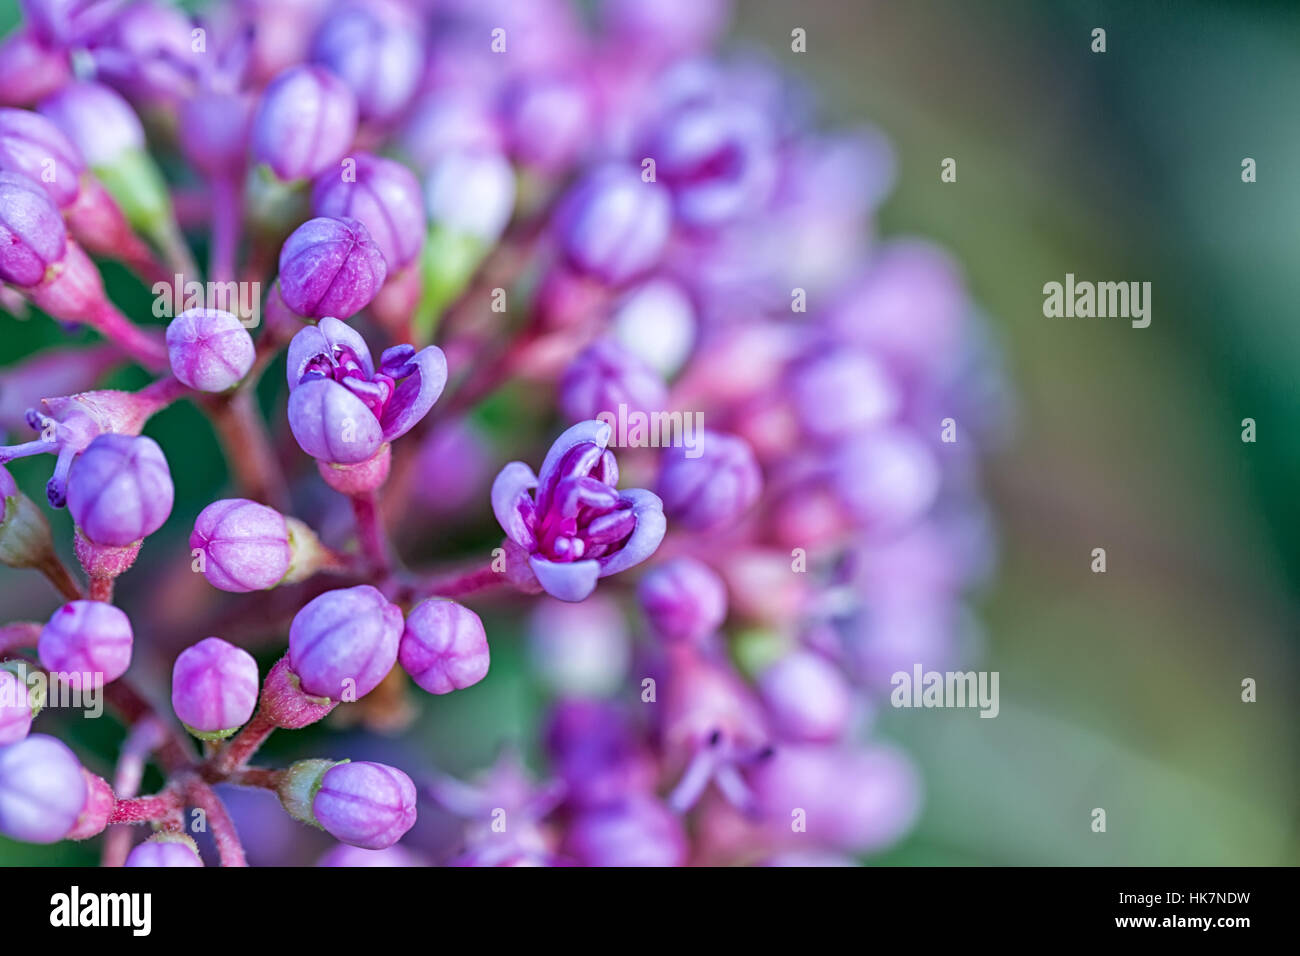 Macro image of autumn lilac violet flowers, abstract soft floral background Stock Photo